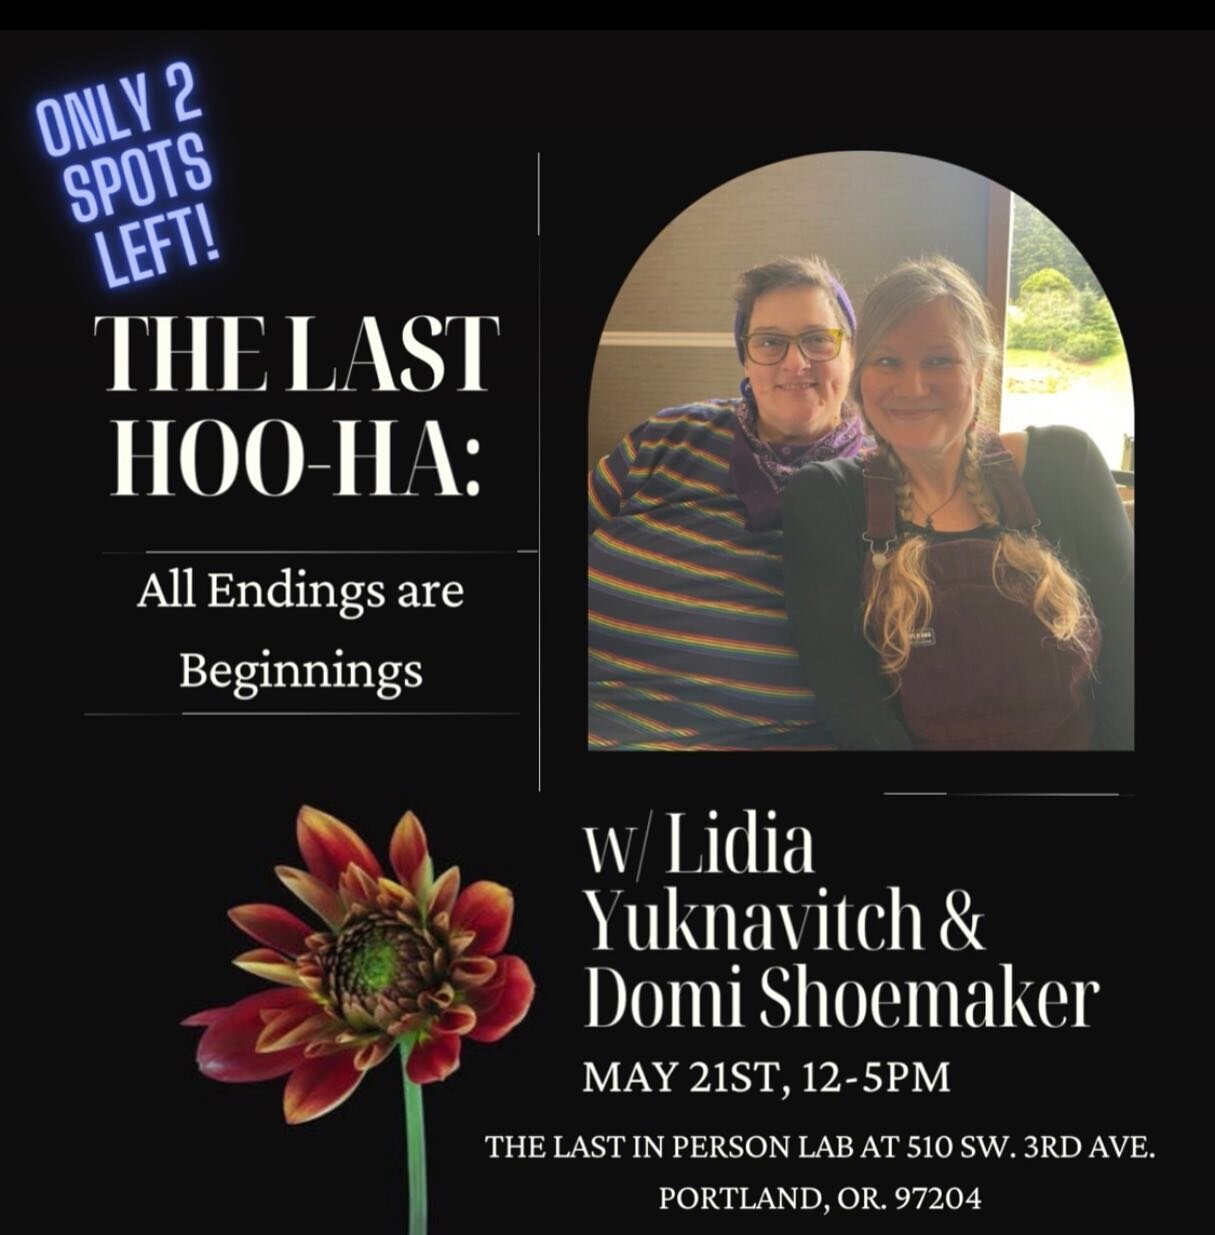 There are TWO SPOTS left in The last Hoo-Ha! 
:
Please join co-founders Domi Shoemaker and Lidia Yuknavitch for what will be our last generative creative lab at the Corporeal Center as we move into our next Corporeal Writing adaptations. In this gene